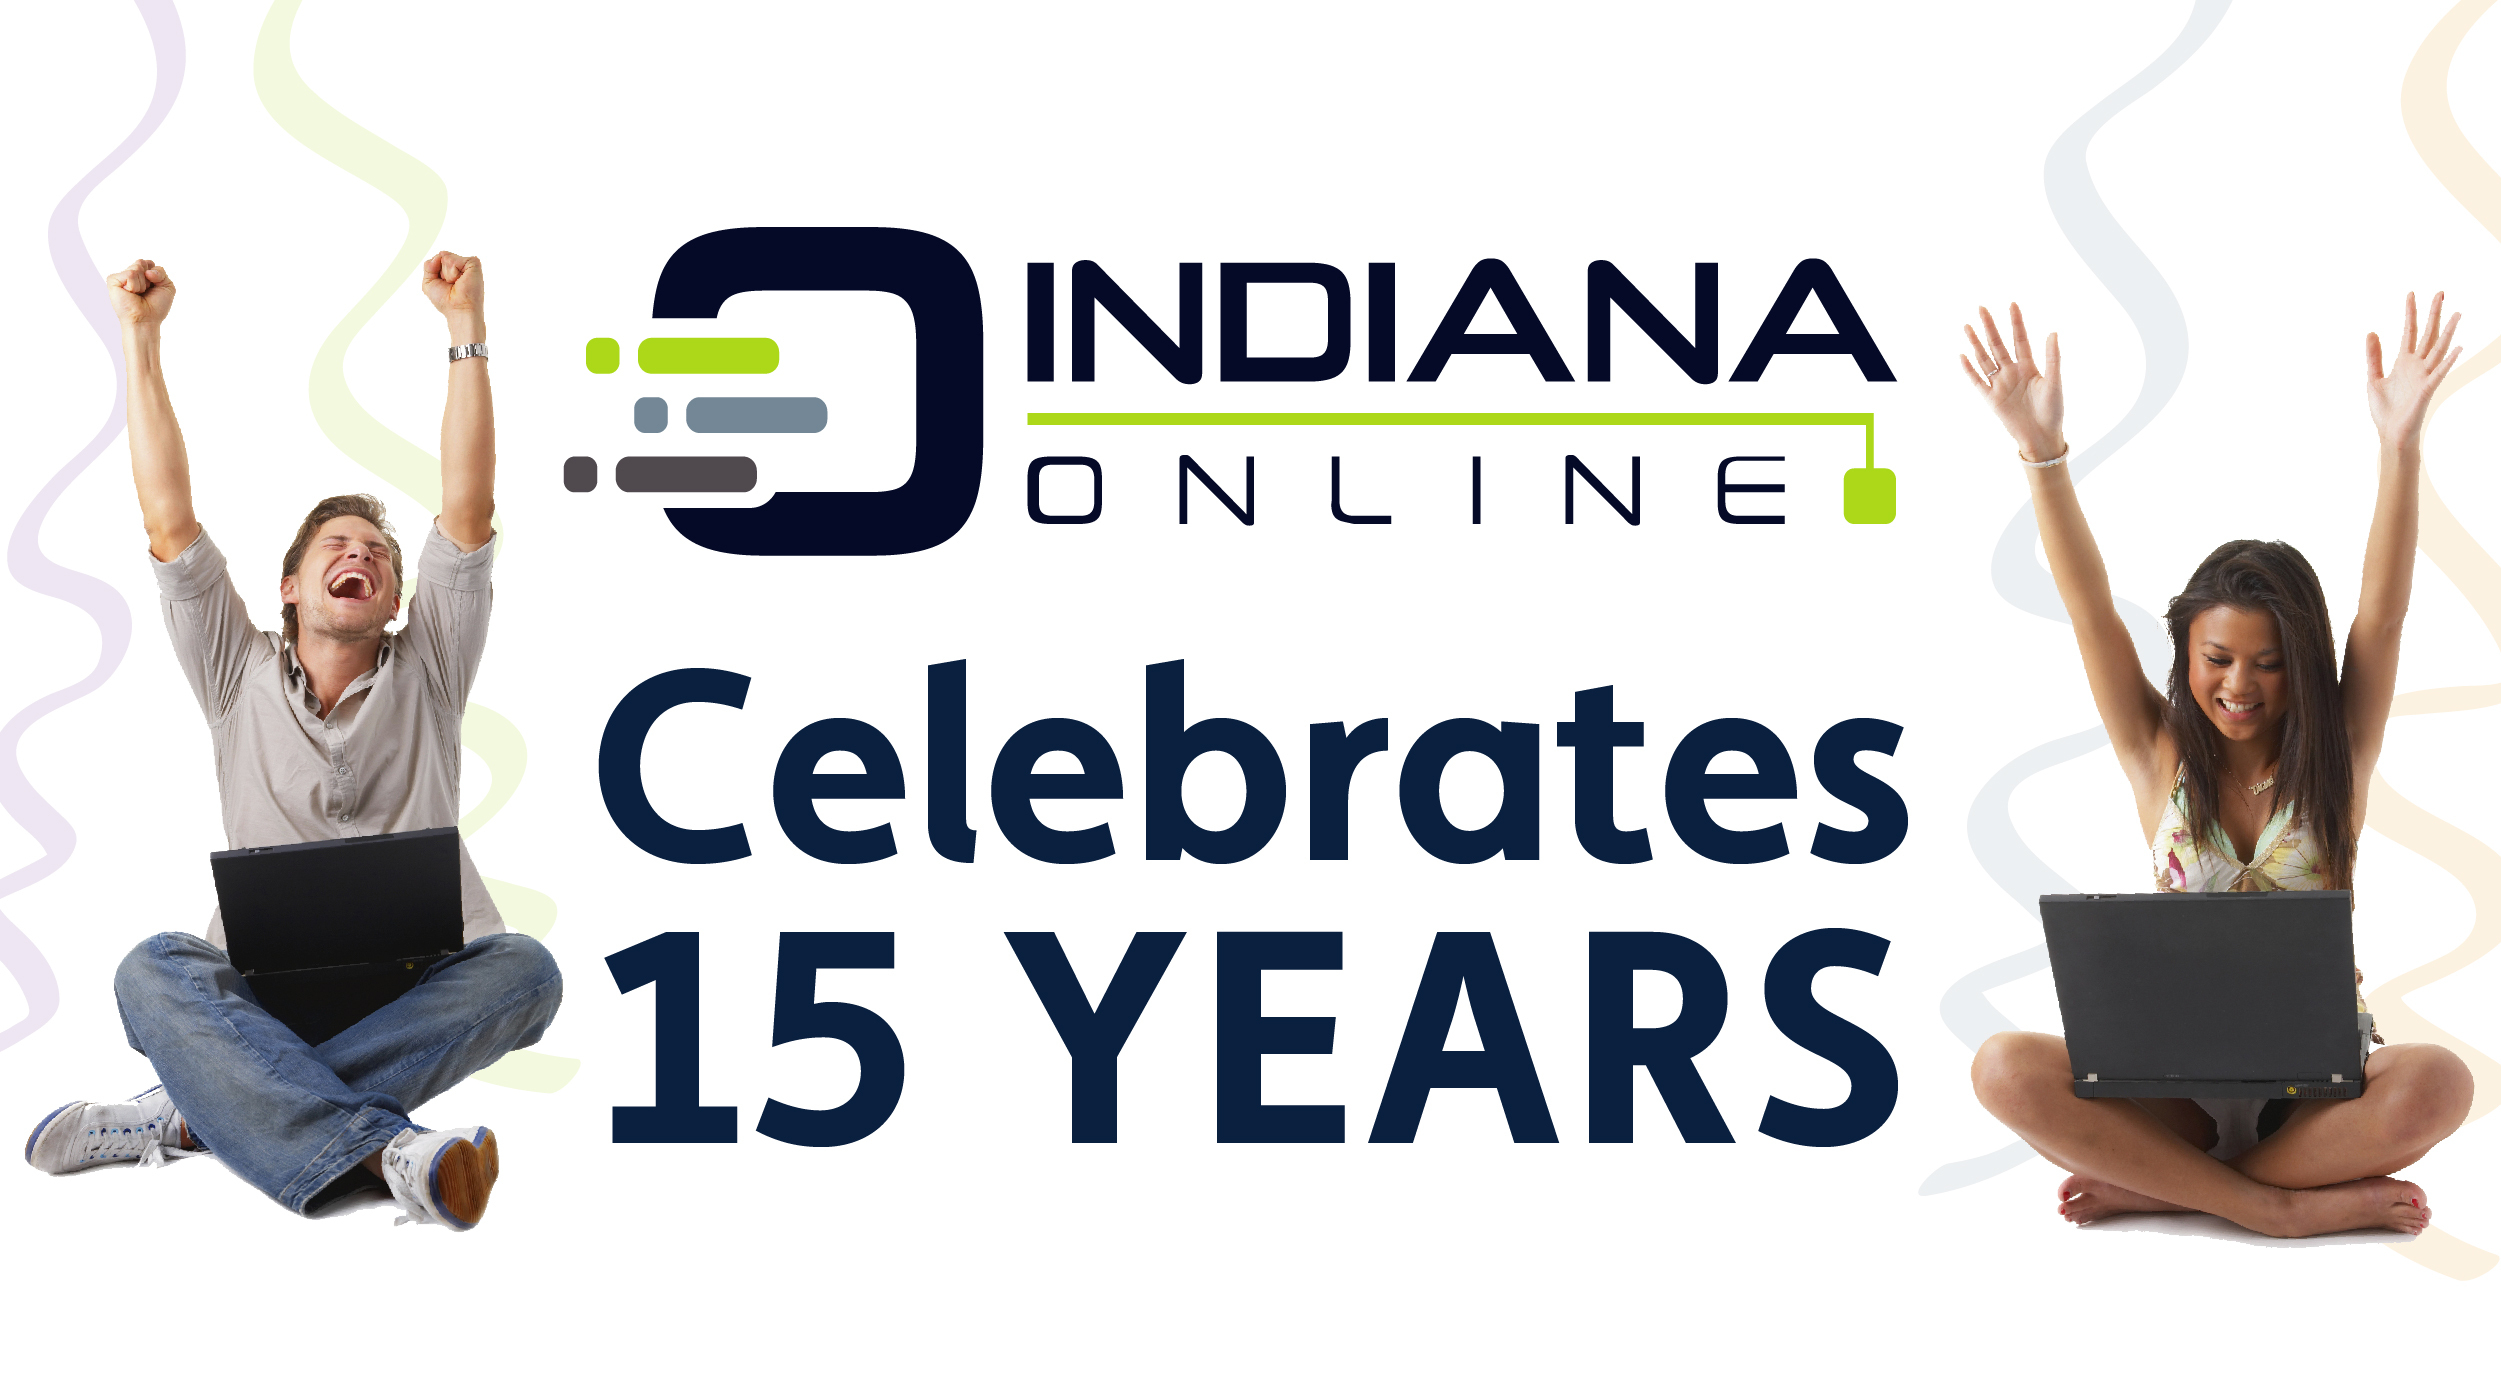 Then & Now Indiana Online Celebrates 15 Years Indiana Online